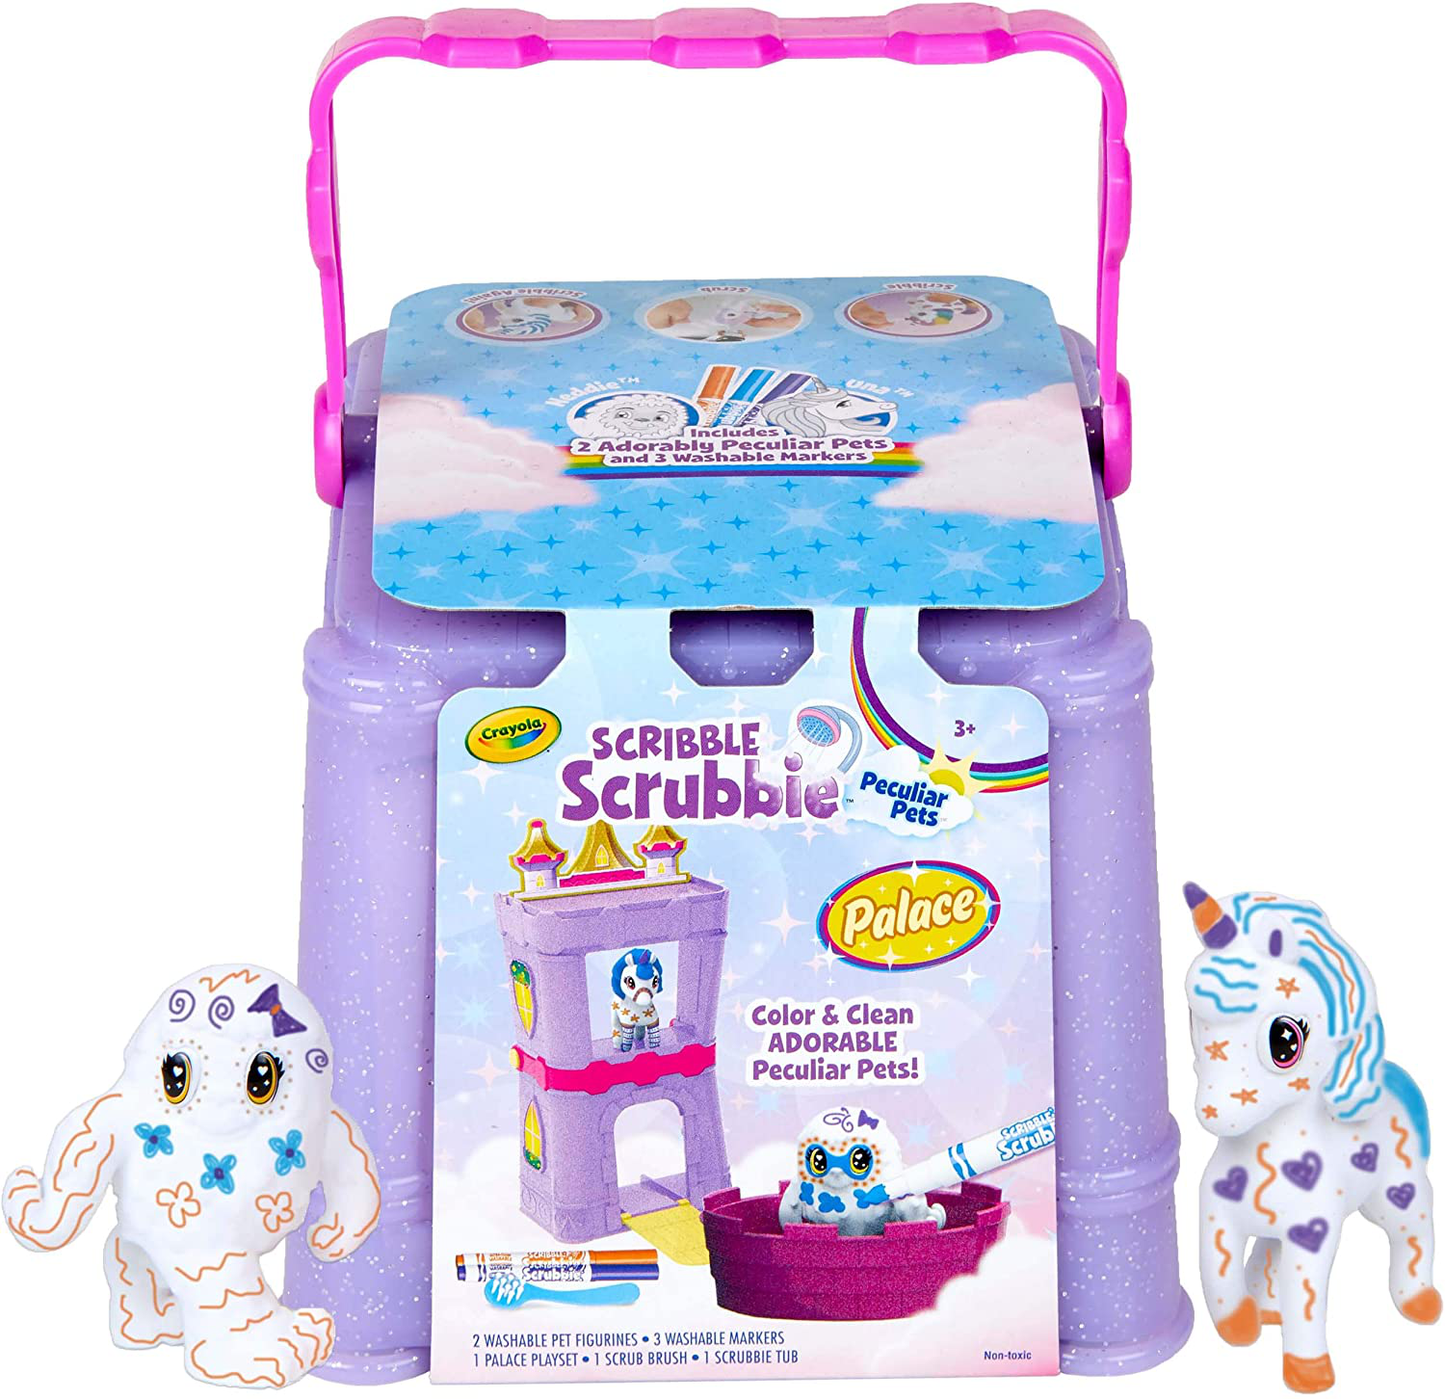 Crayola Scribble Scrubbie Peculiar Pets, Palace Playset with Unicorn and Yeti Kids Toys, Gift for Girls & Boys, Ages 3, 4, 5, 6